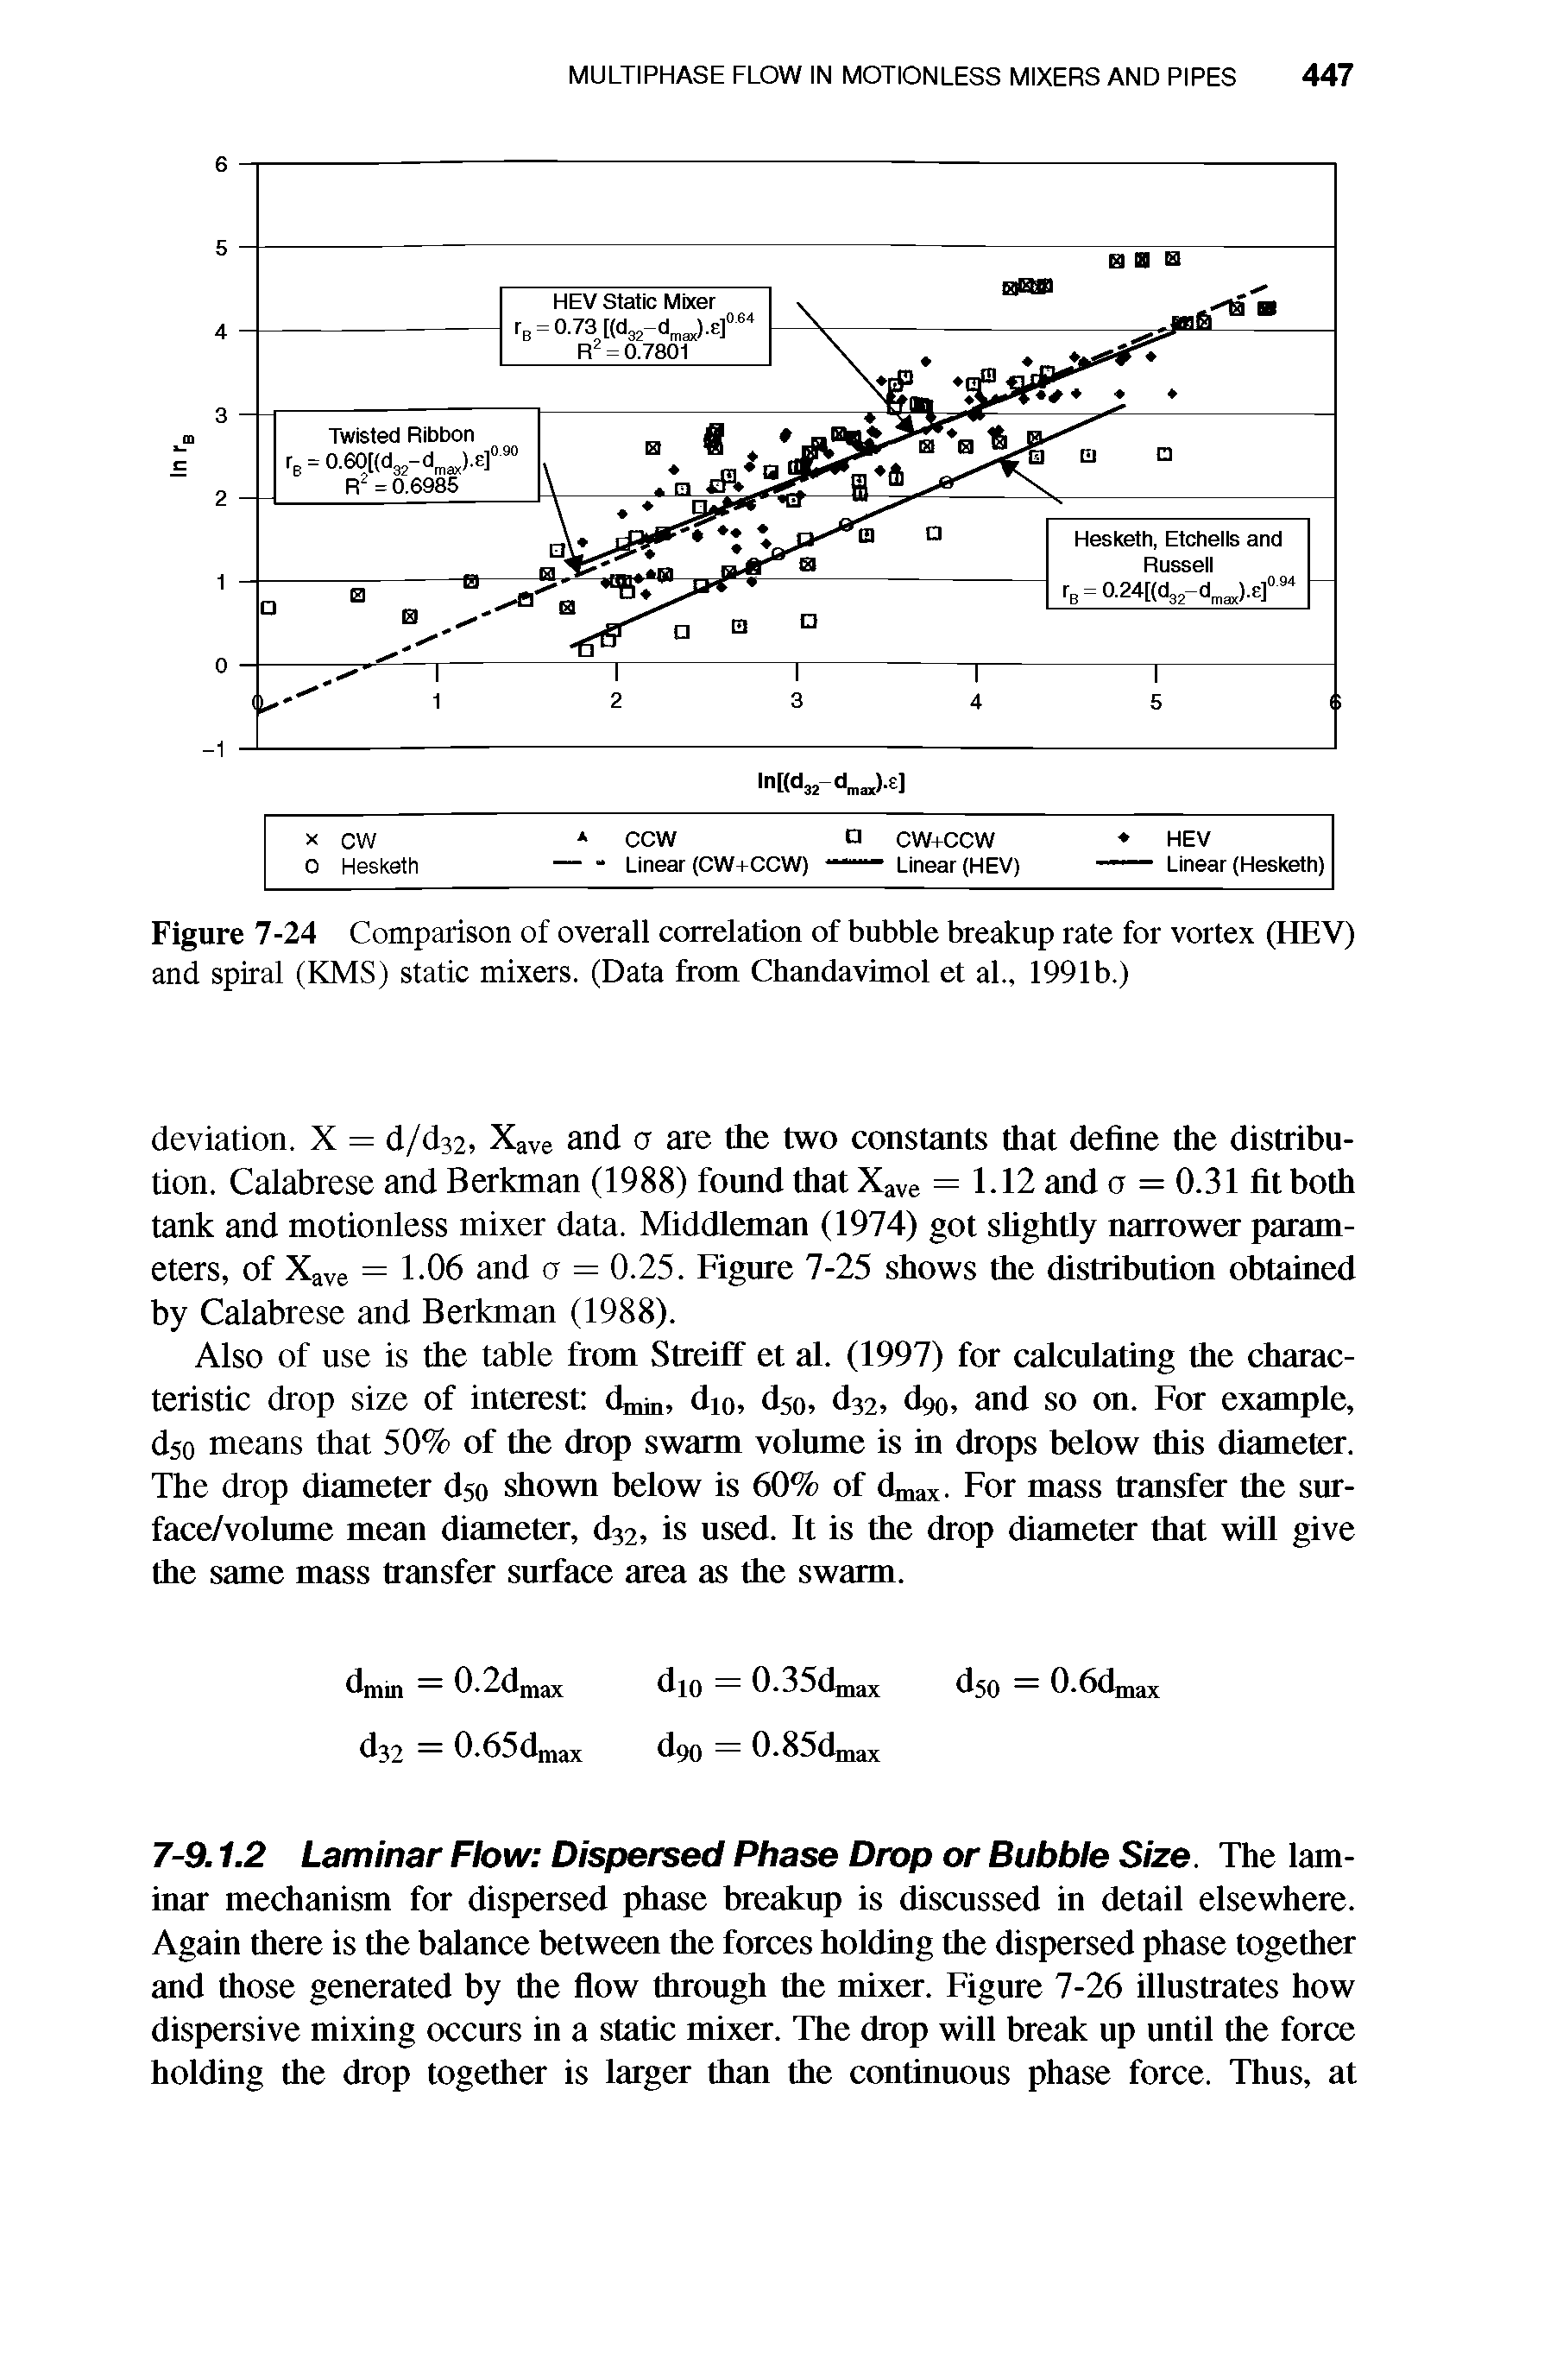 Figure 7-24 Comparison of overall correlation of bubble breakup rate for vortex (HEV) and spiral (KMS) static mixers. (Data from Chandavimol et al., 1991b.)...